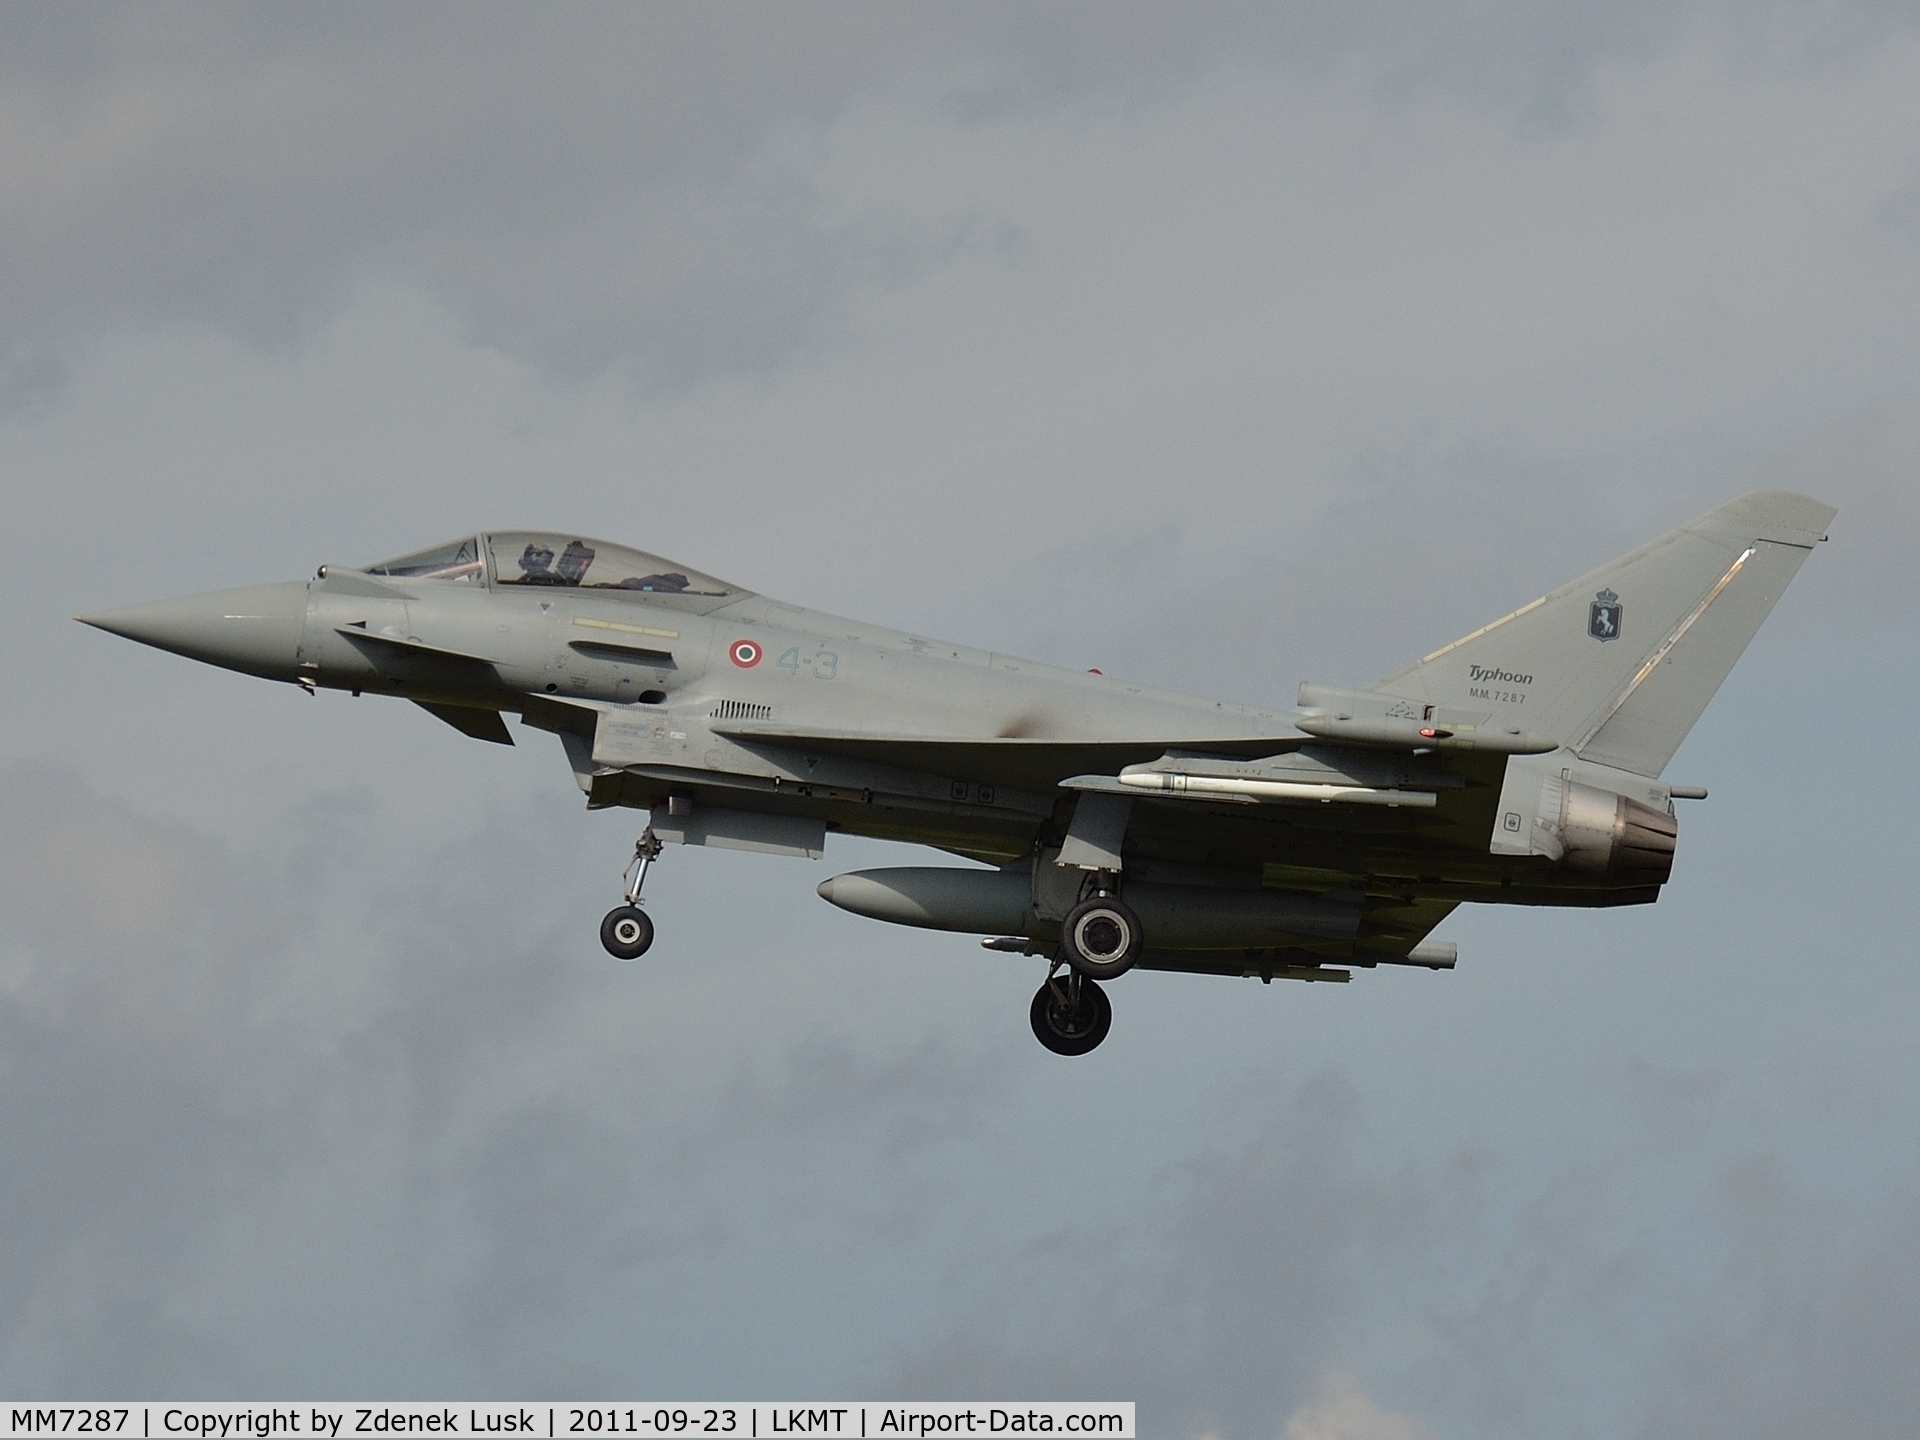 MM7287, Eurofighter EF-2000 Typhoon S C/N IS019, Arrival to Days of NATO 2011 event.